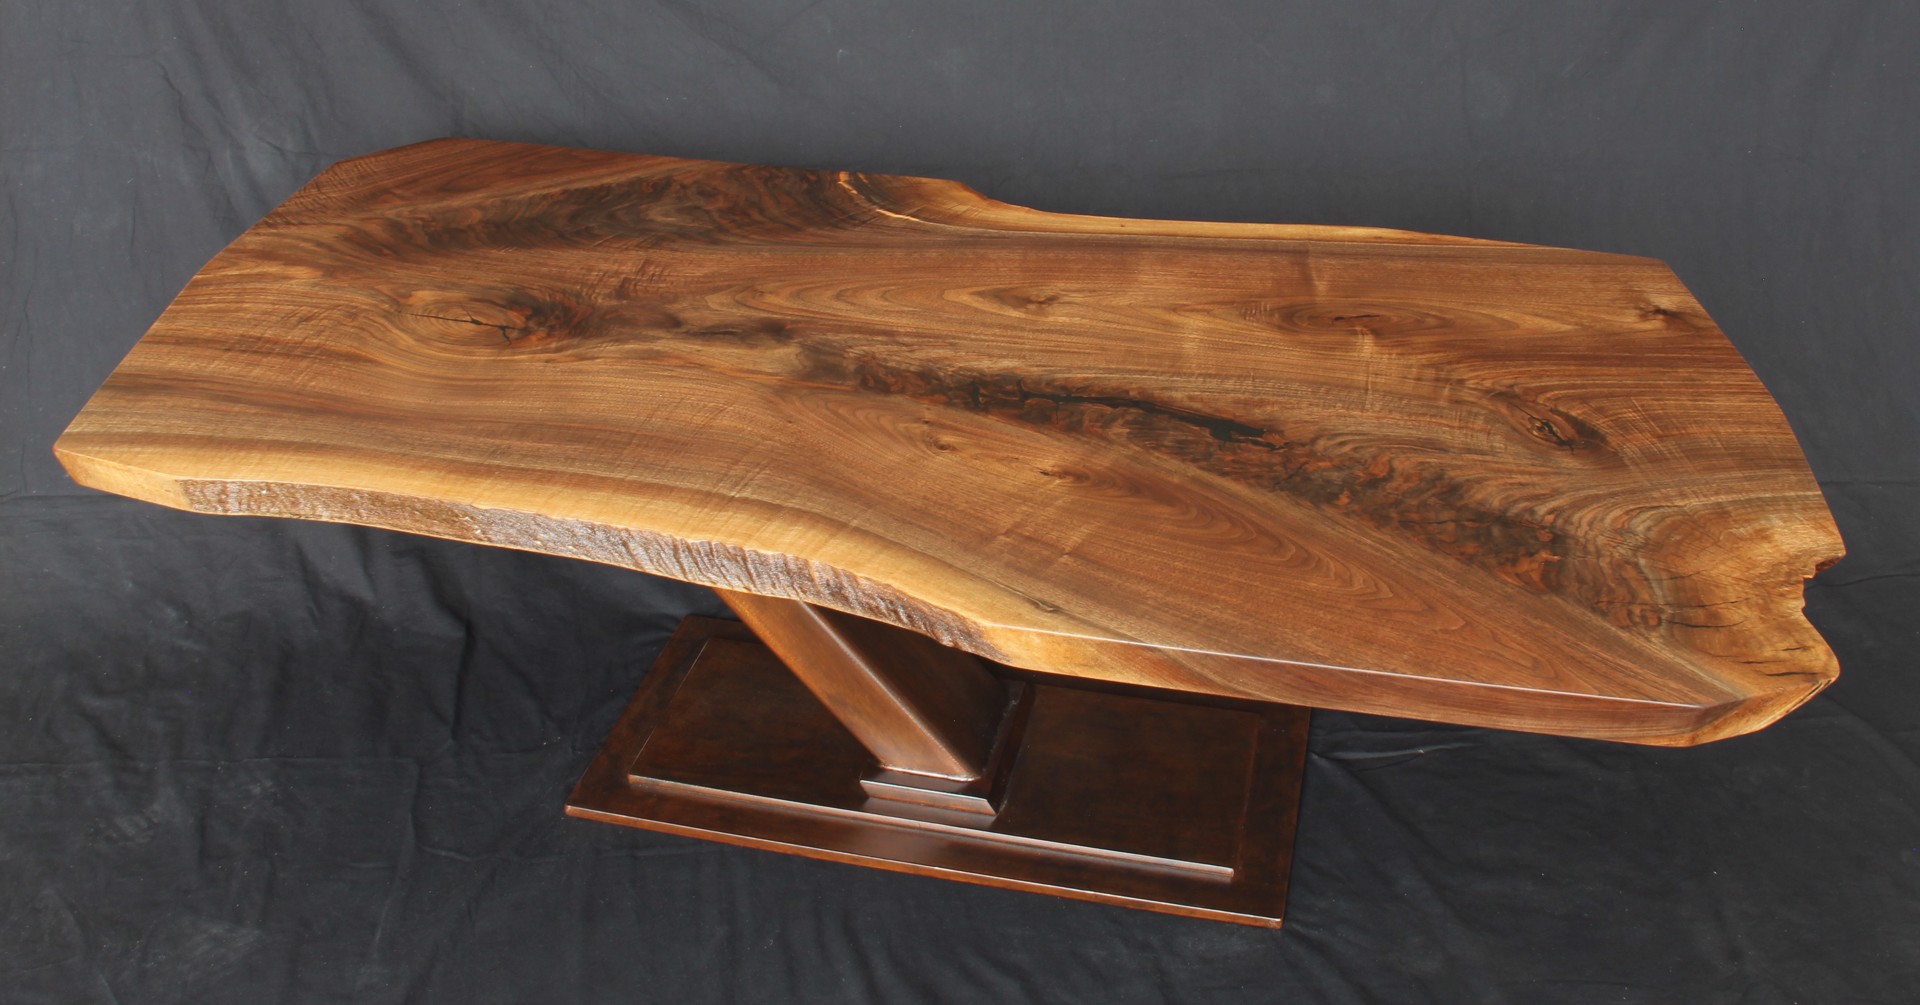 Black Walnut Cantilevered Coffee Table 112021A by Ron Gill